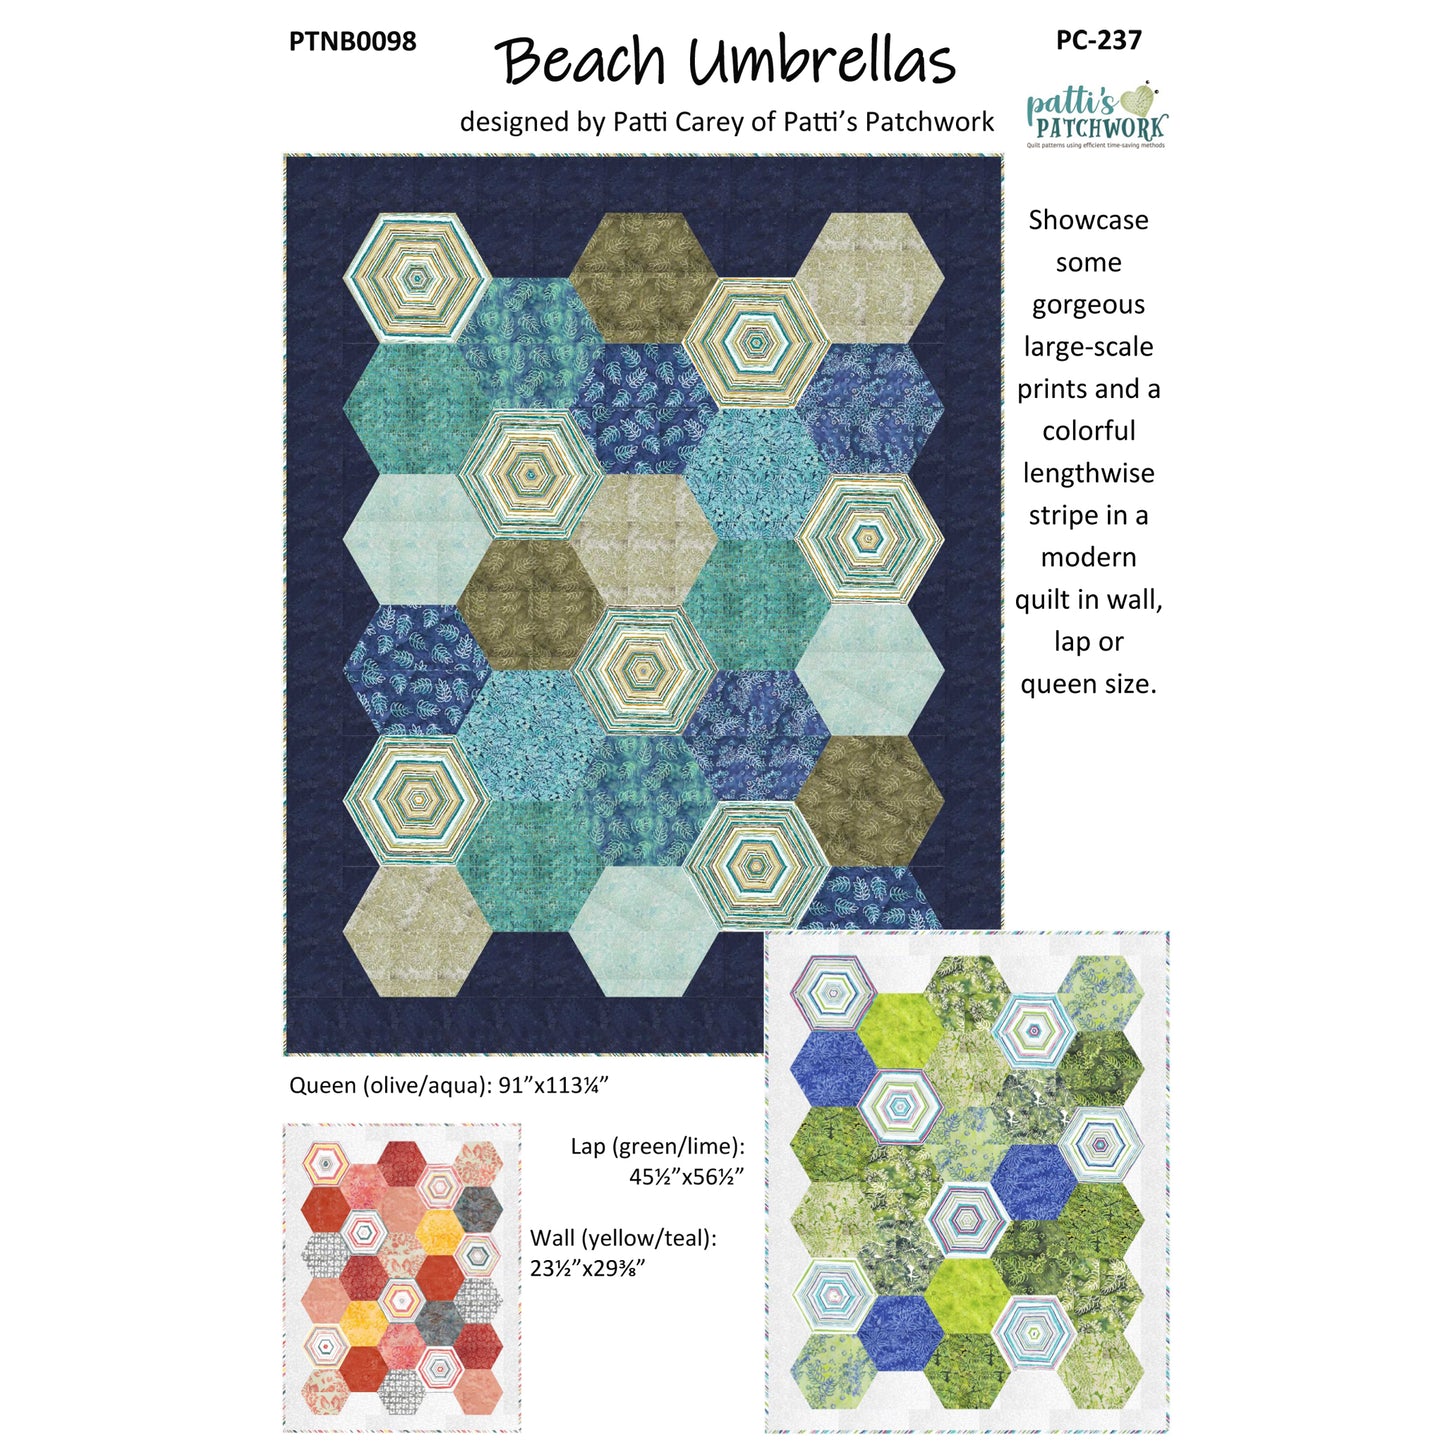 Cover image of pattern for "Beach Umbrellas" Quilt.